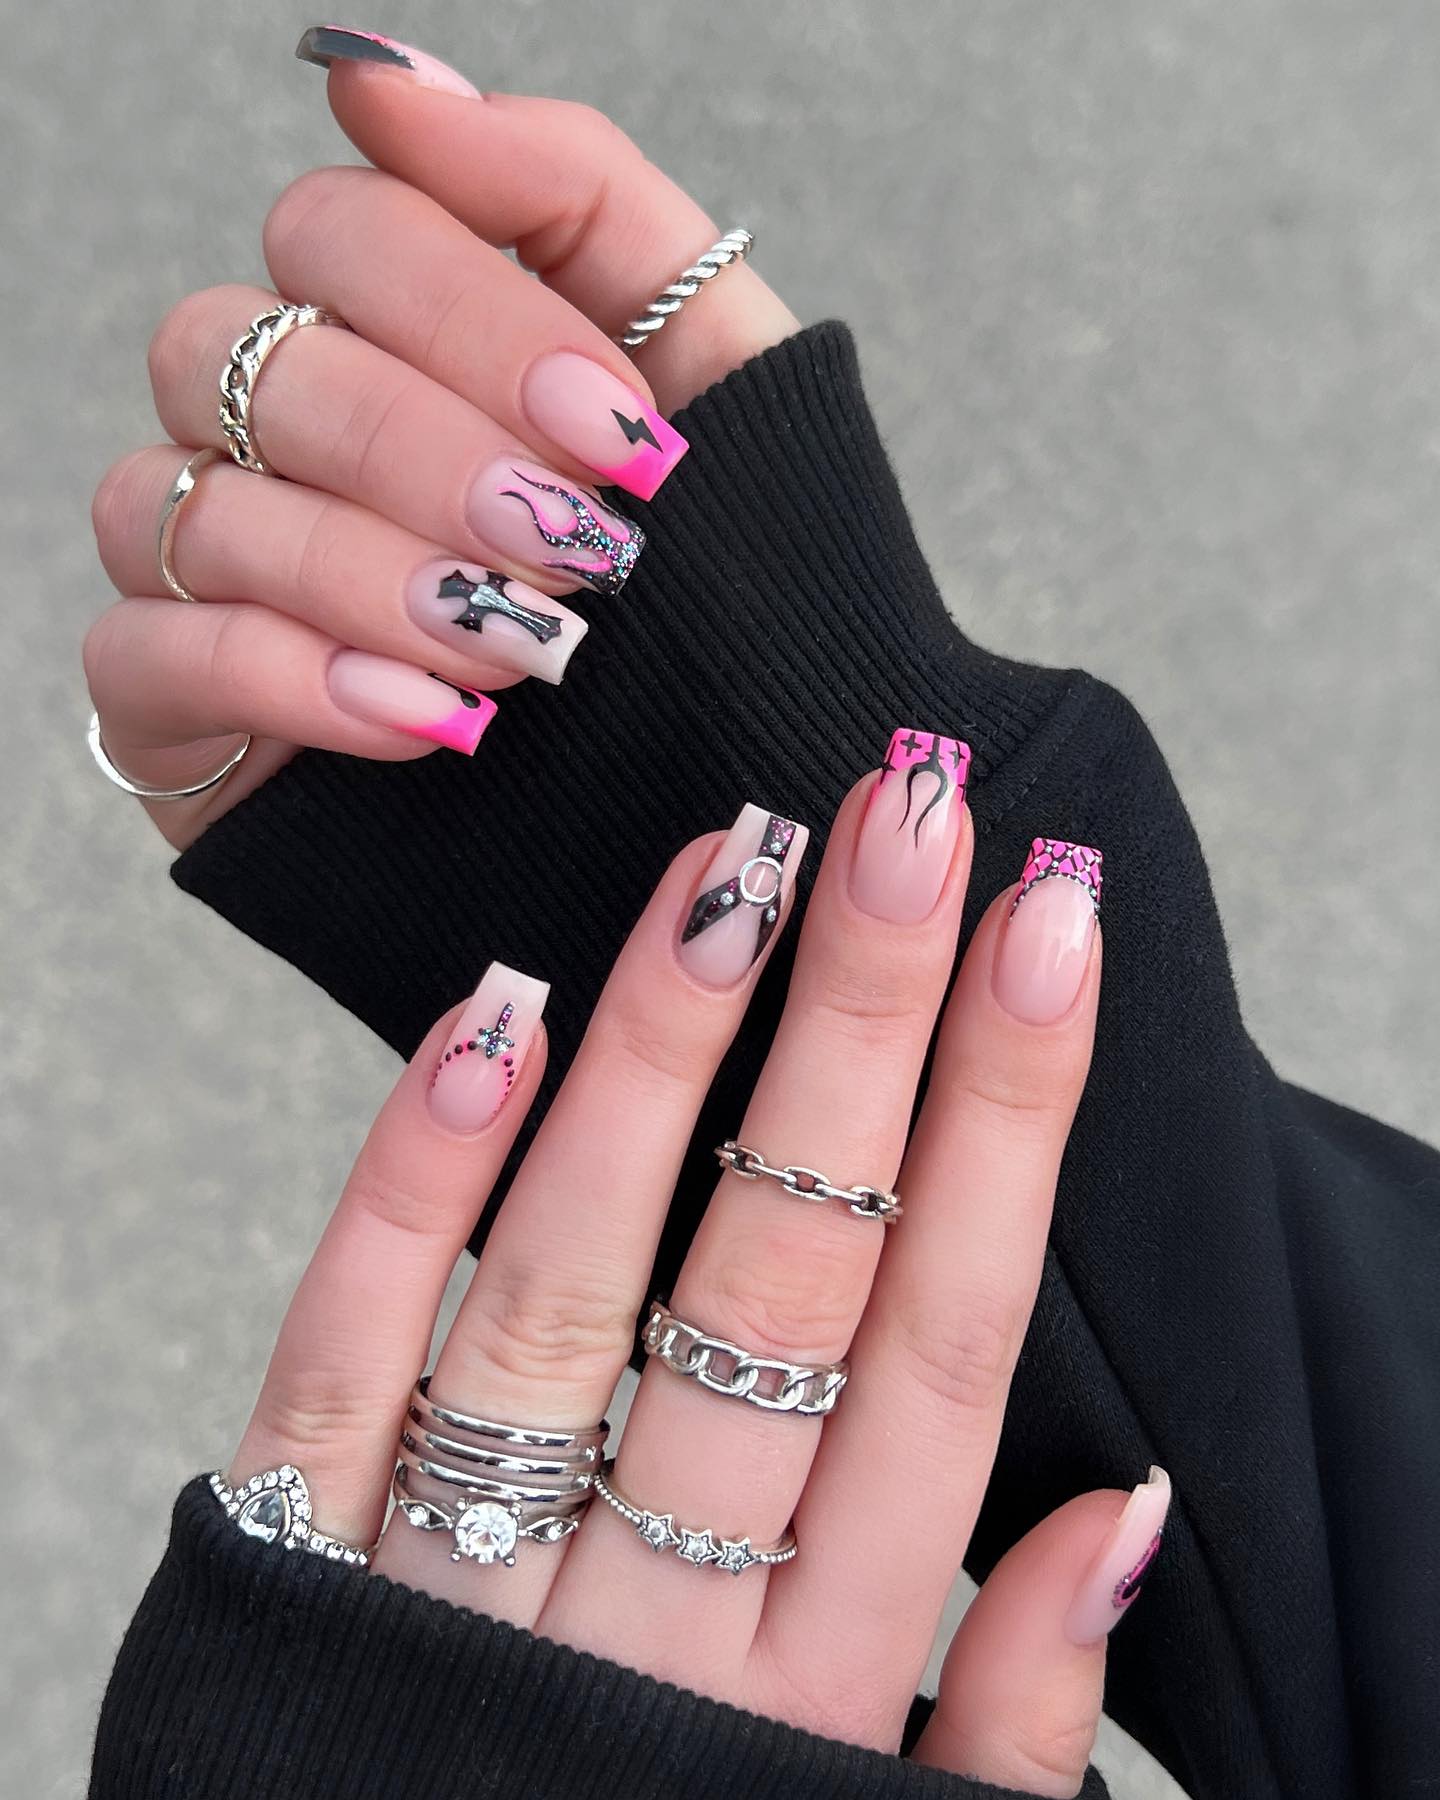 100+ Short Nail Designs You’ll Want To Try This Year images 50